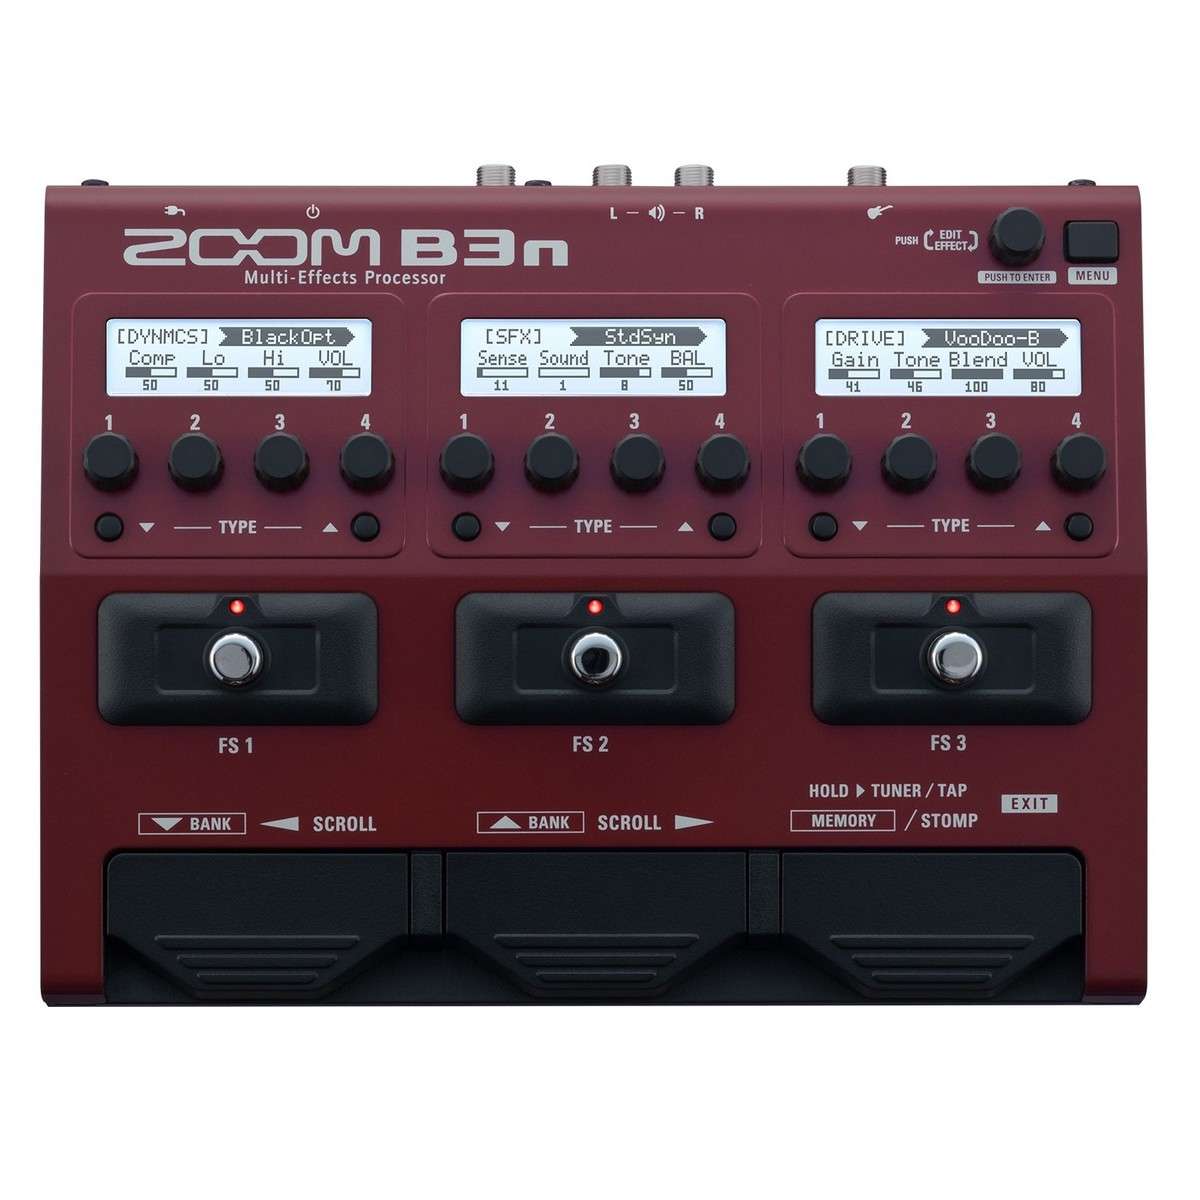 Zoom B3n Effects and Amp Simulator Pedal - New Zoom     Multi Effects      Reverb Delay  EQ  Overdrive Distortion  Guitar Effect Pedal